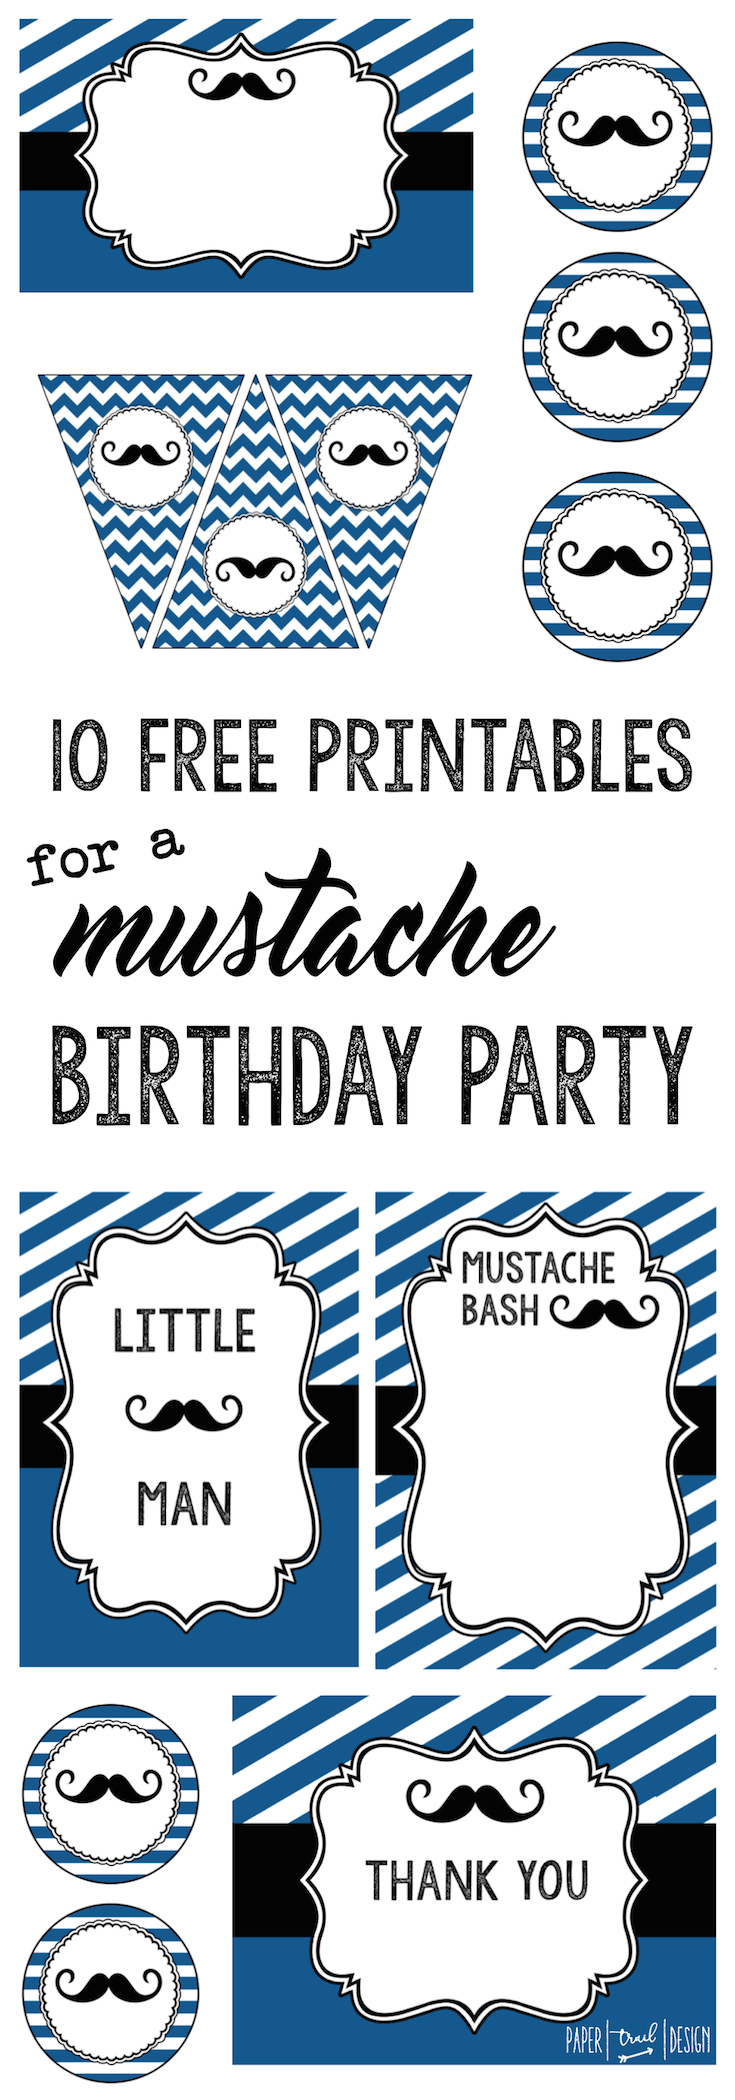 Mustache Birthday Party: Everything you need for a mustache party themed baby shower including banner, food labels, invitation, cupcake toppers, art decor print, thank you cards, and photo booth. 